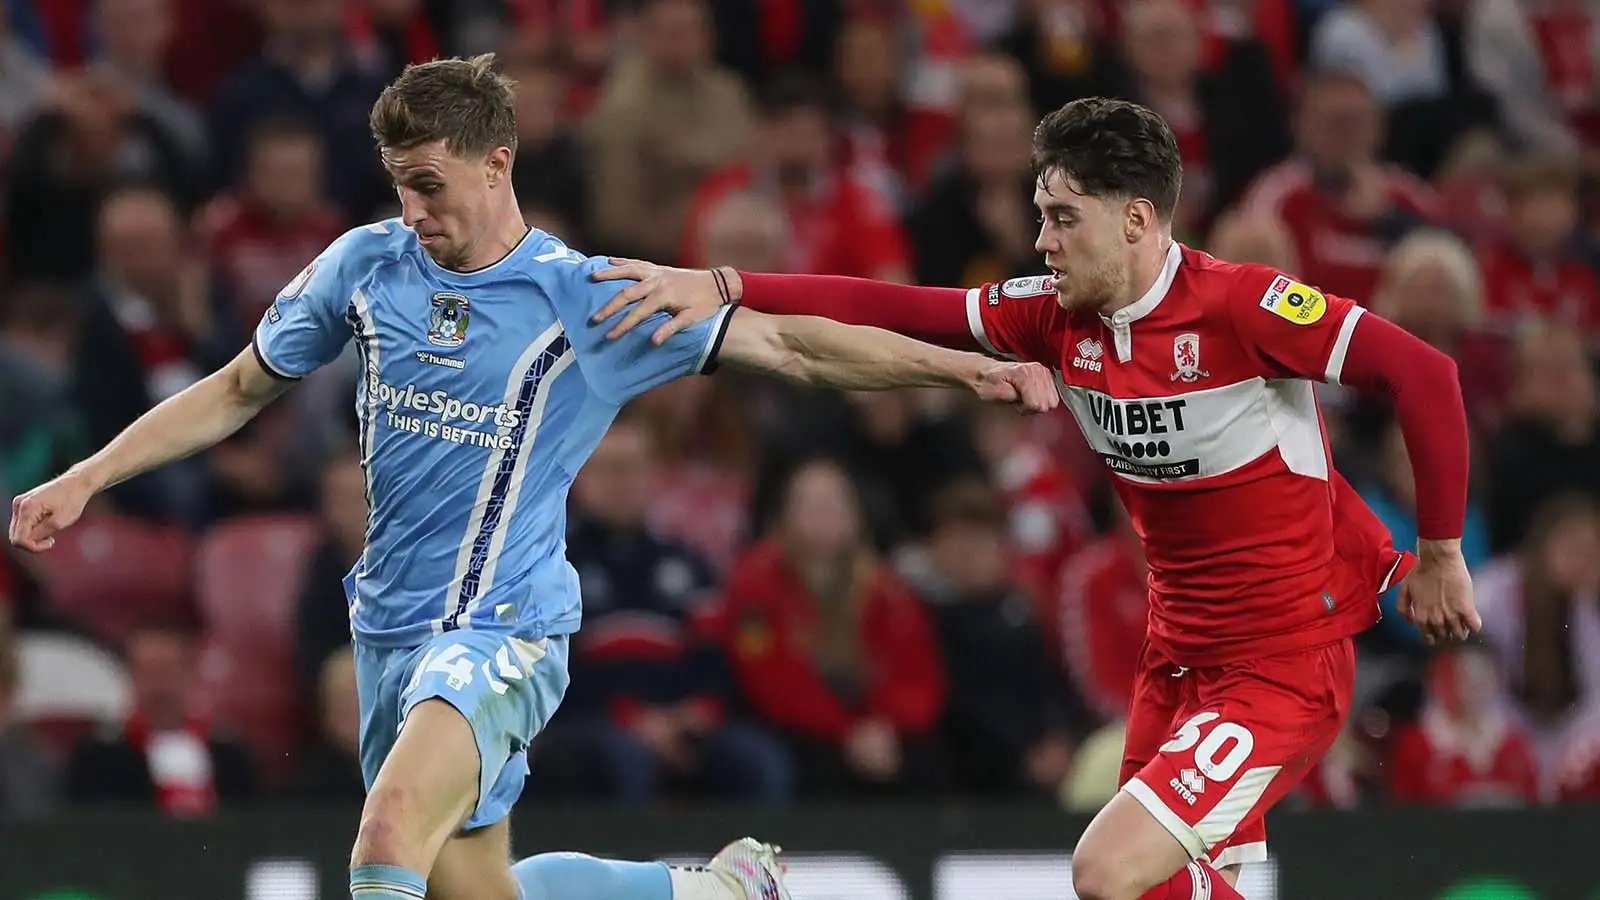 Ben Sheaf of Coventry City in action with Middlesbrough's Hayden Hackney during the Sky Bet Championship Play Off Semi Final 2nd Leg between Middlesbrough and Coventry City at the Riverside Stadium, Middlesbrough on Wednesday 17th May 2023